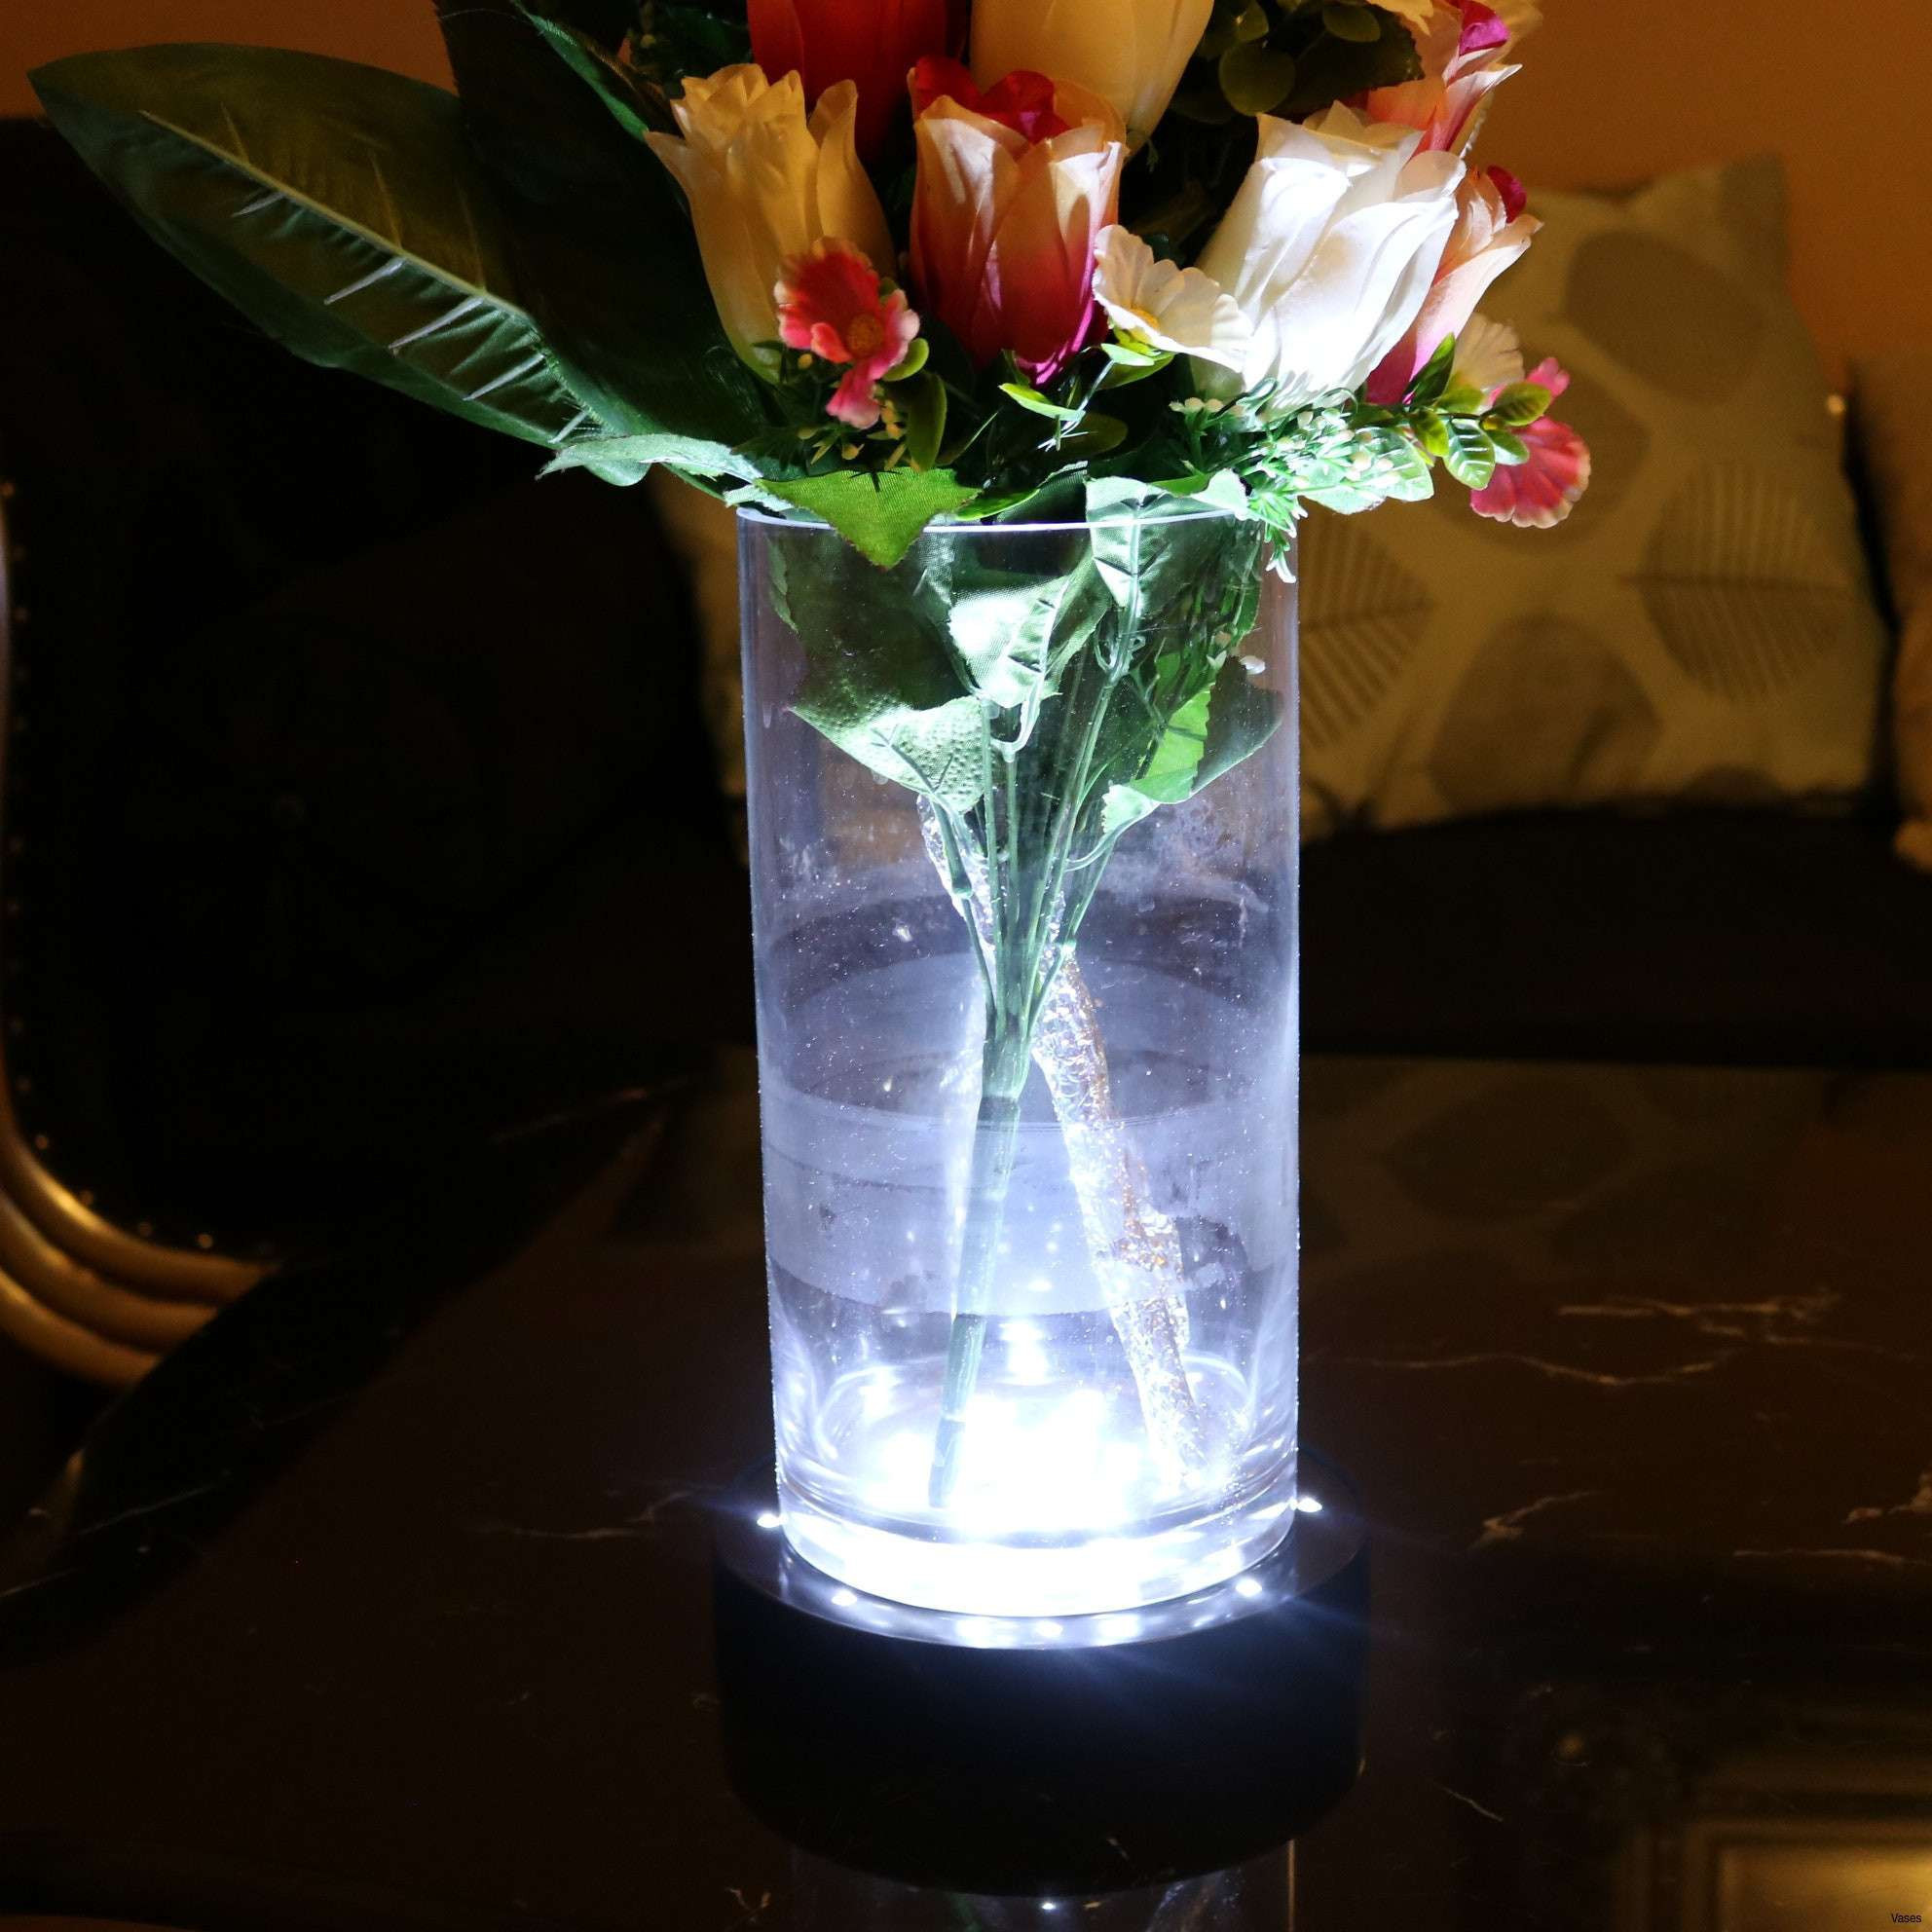 15 Trendy Kate Spade Vase Sale 2022 free download kate spade vase sale of vases artificial plants collection page 43 within glass wall vases for flowers photograph vases disposable plastic single cheap flower rose vasei 0d design of glass w